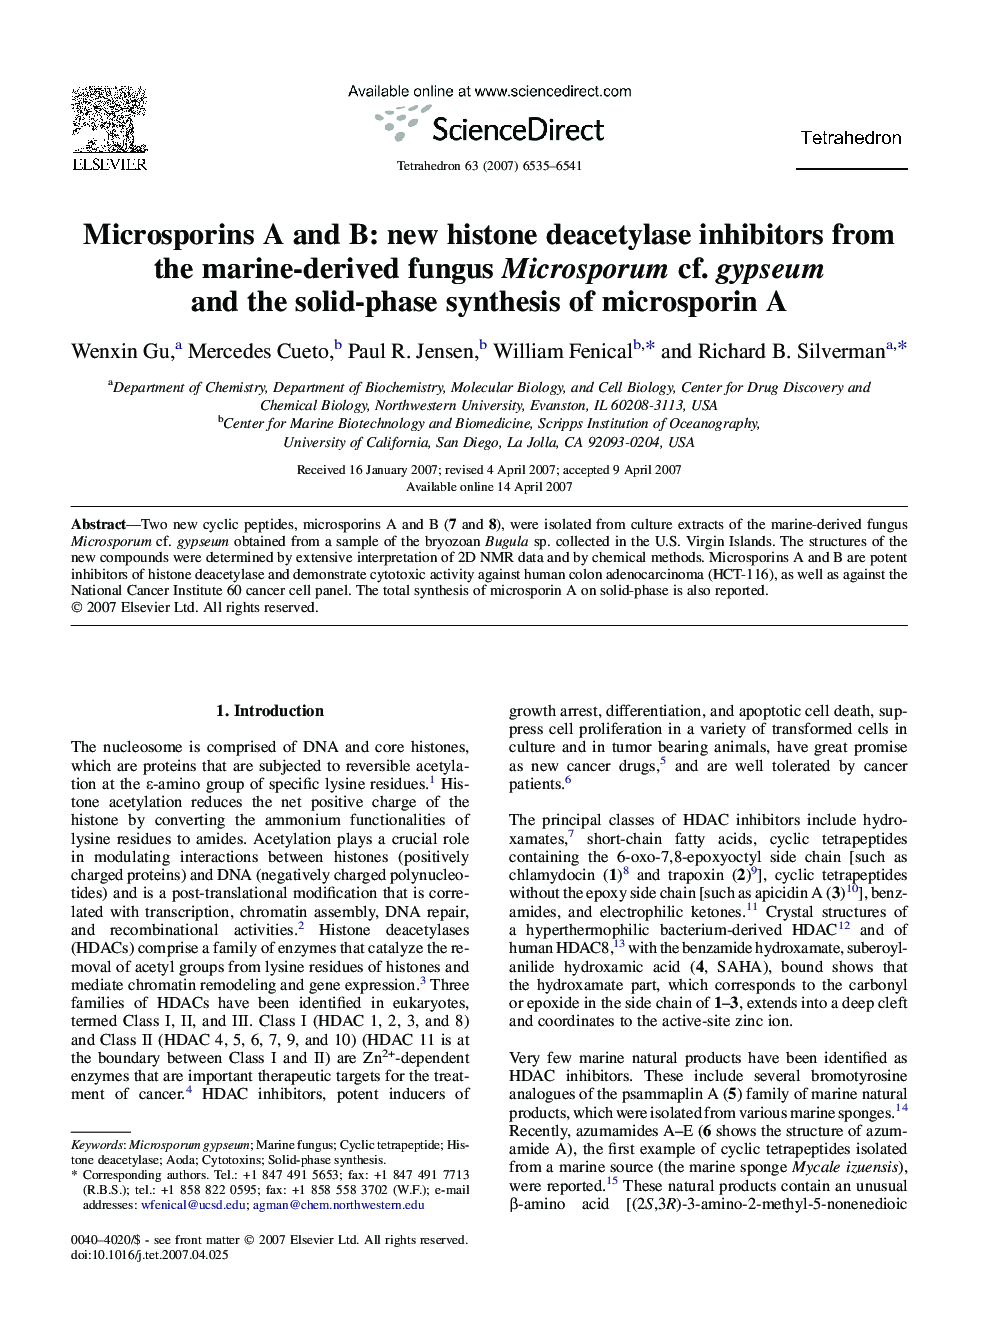 Microsporins A and B: new histone deacetylase inhibitors from the marine-derived fungus Microsporum cf. gypseum and the solid-phase synthesis of microsporin A